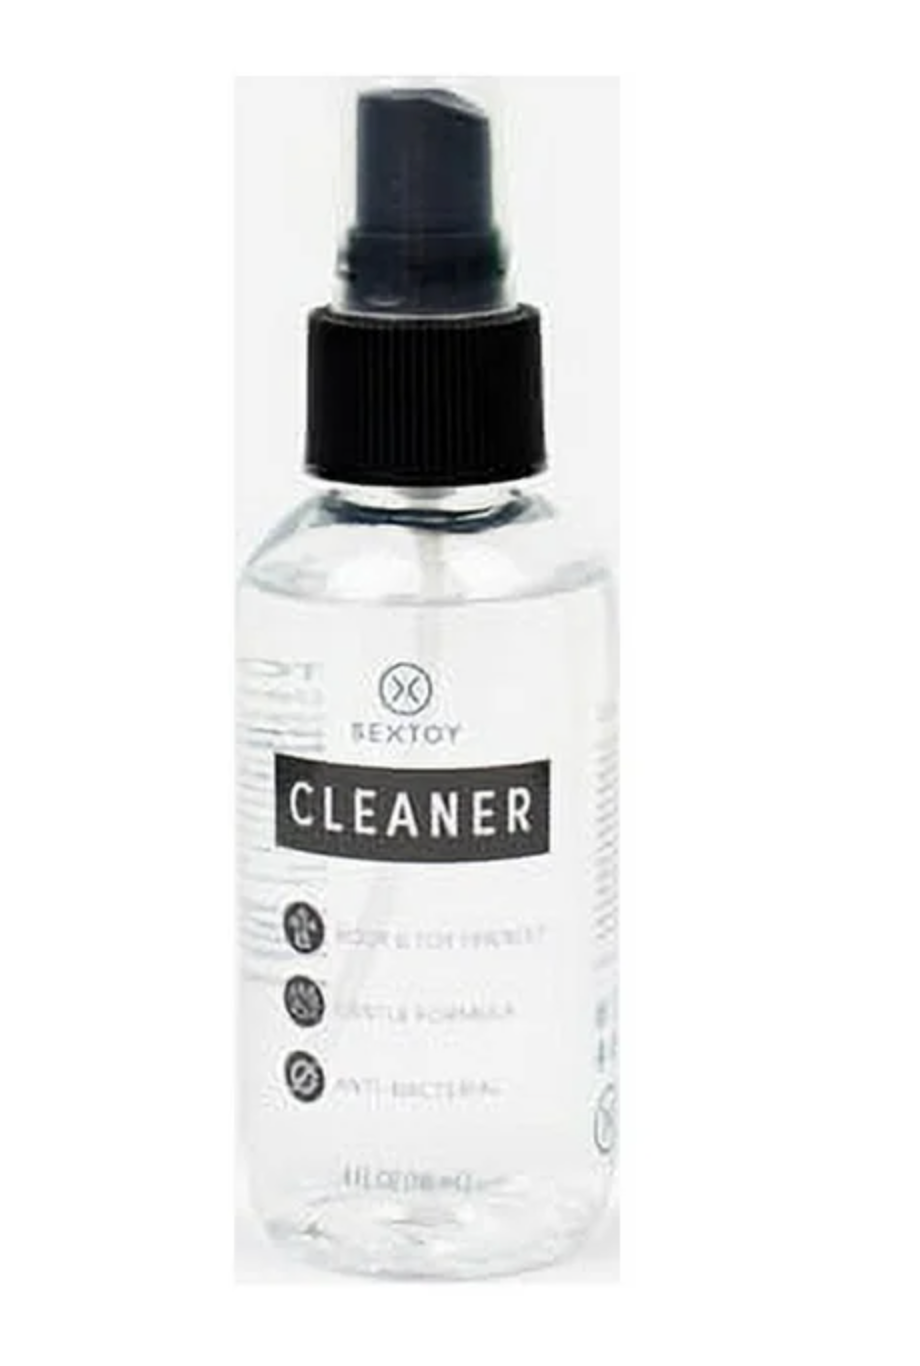 Toy cleaner